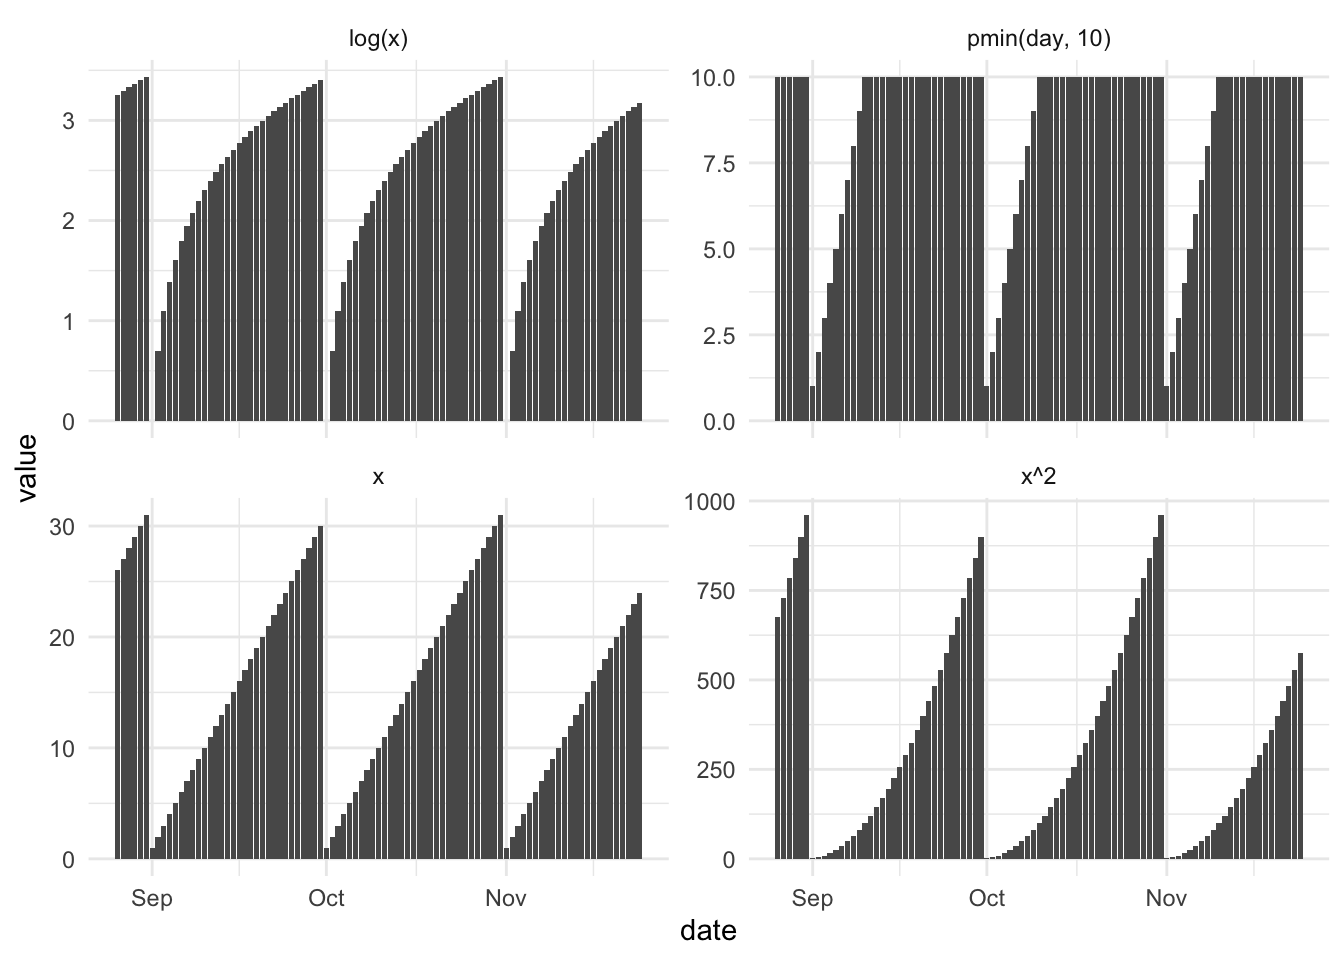 Faceted bar chart. Dates along the x-axis, numeric effect along the y-axis. Each of the charts represents the day of the month for a couple of months. One shows the logarithmic transformation, one shows the untransformed data one looks at the square transformation, and one looks at the untransformed data that has been rounded down to 10, creating a plateau.